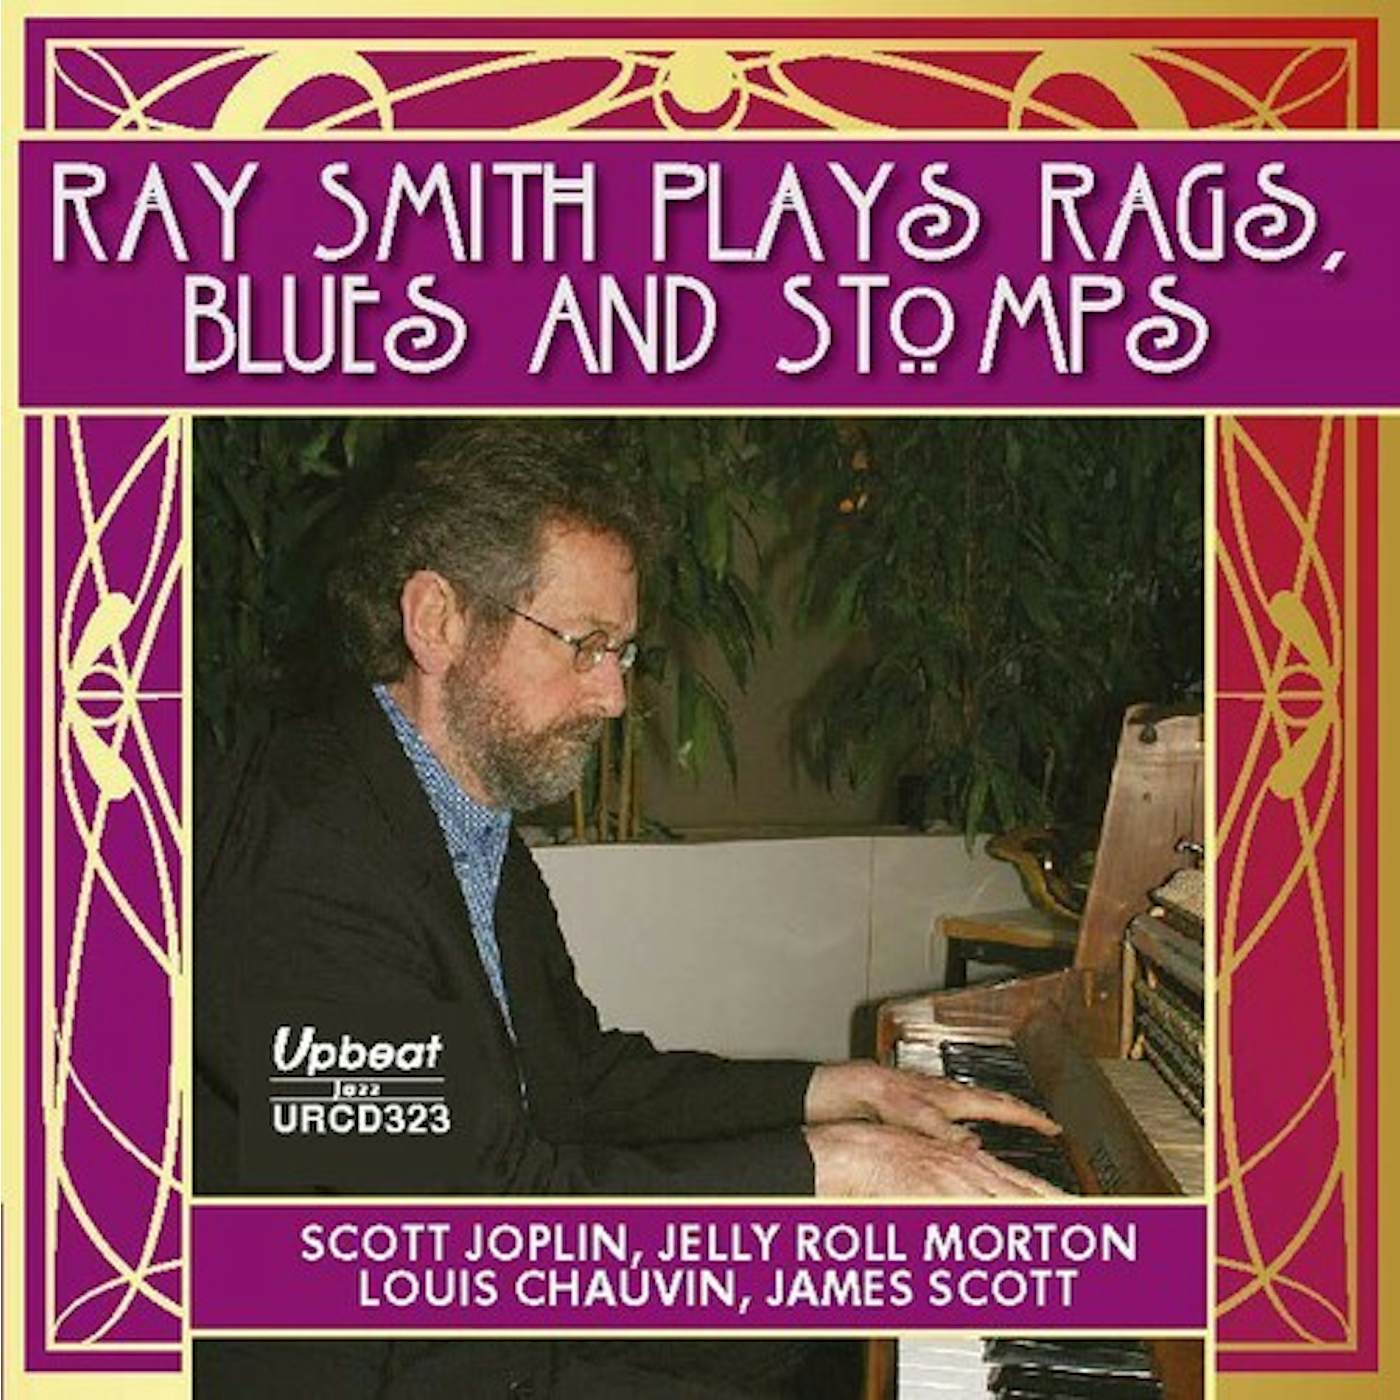 RAY SMITH PLAYS RAGS STOMPS & BLUES CD